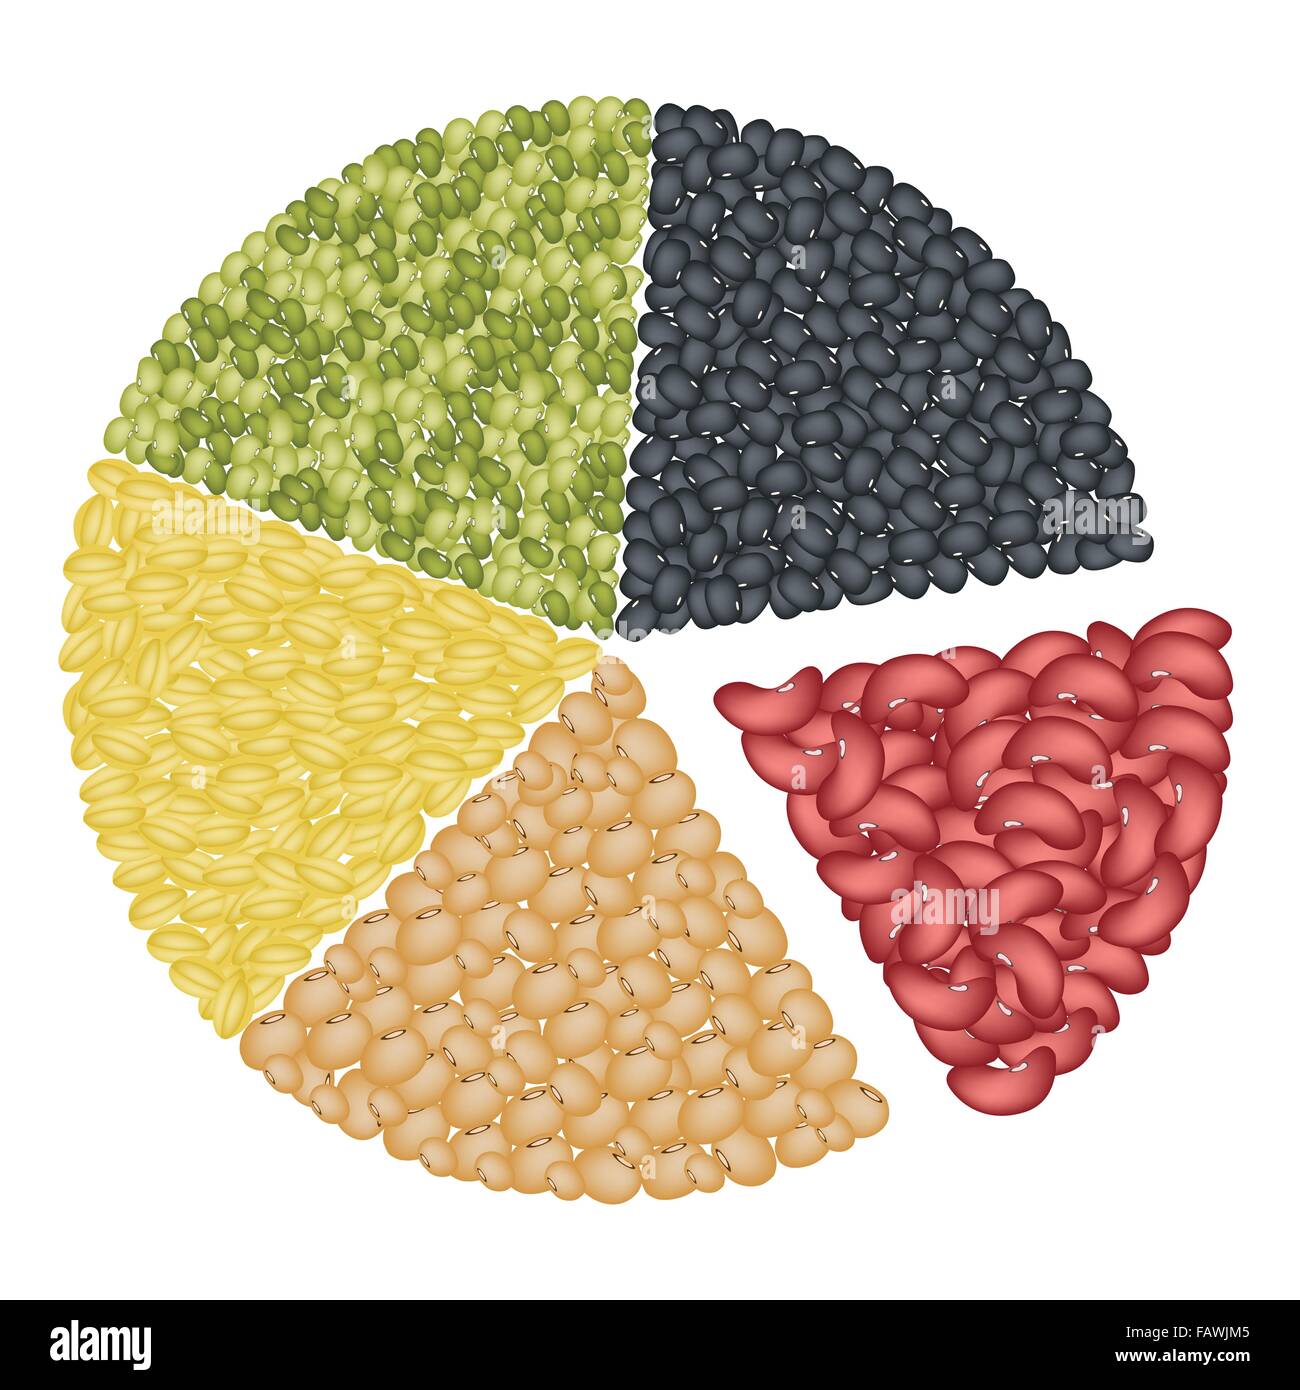 An Illustration Collection of Different Dried Beans, Mung Bean, Kidney Bean, Black Eye Bean, Soy Bean and Yellow Split Peas Form Stock Photo